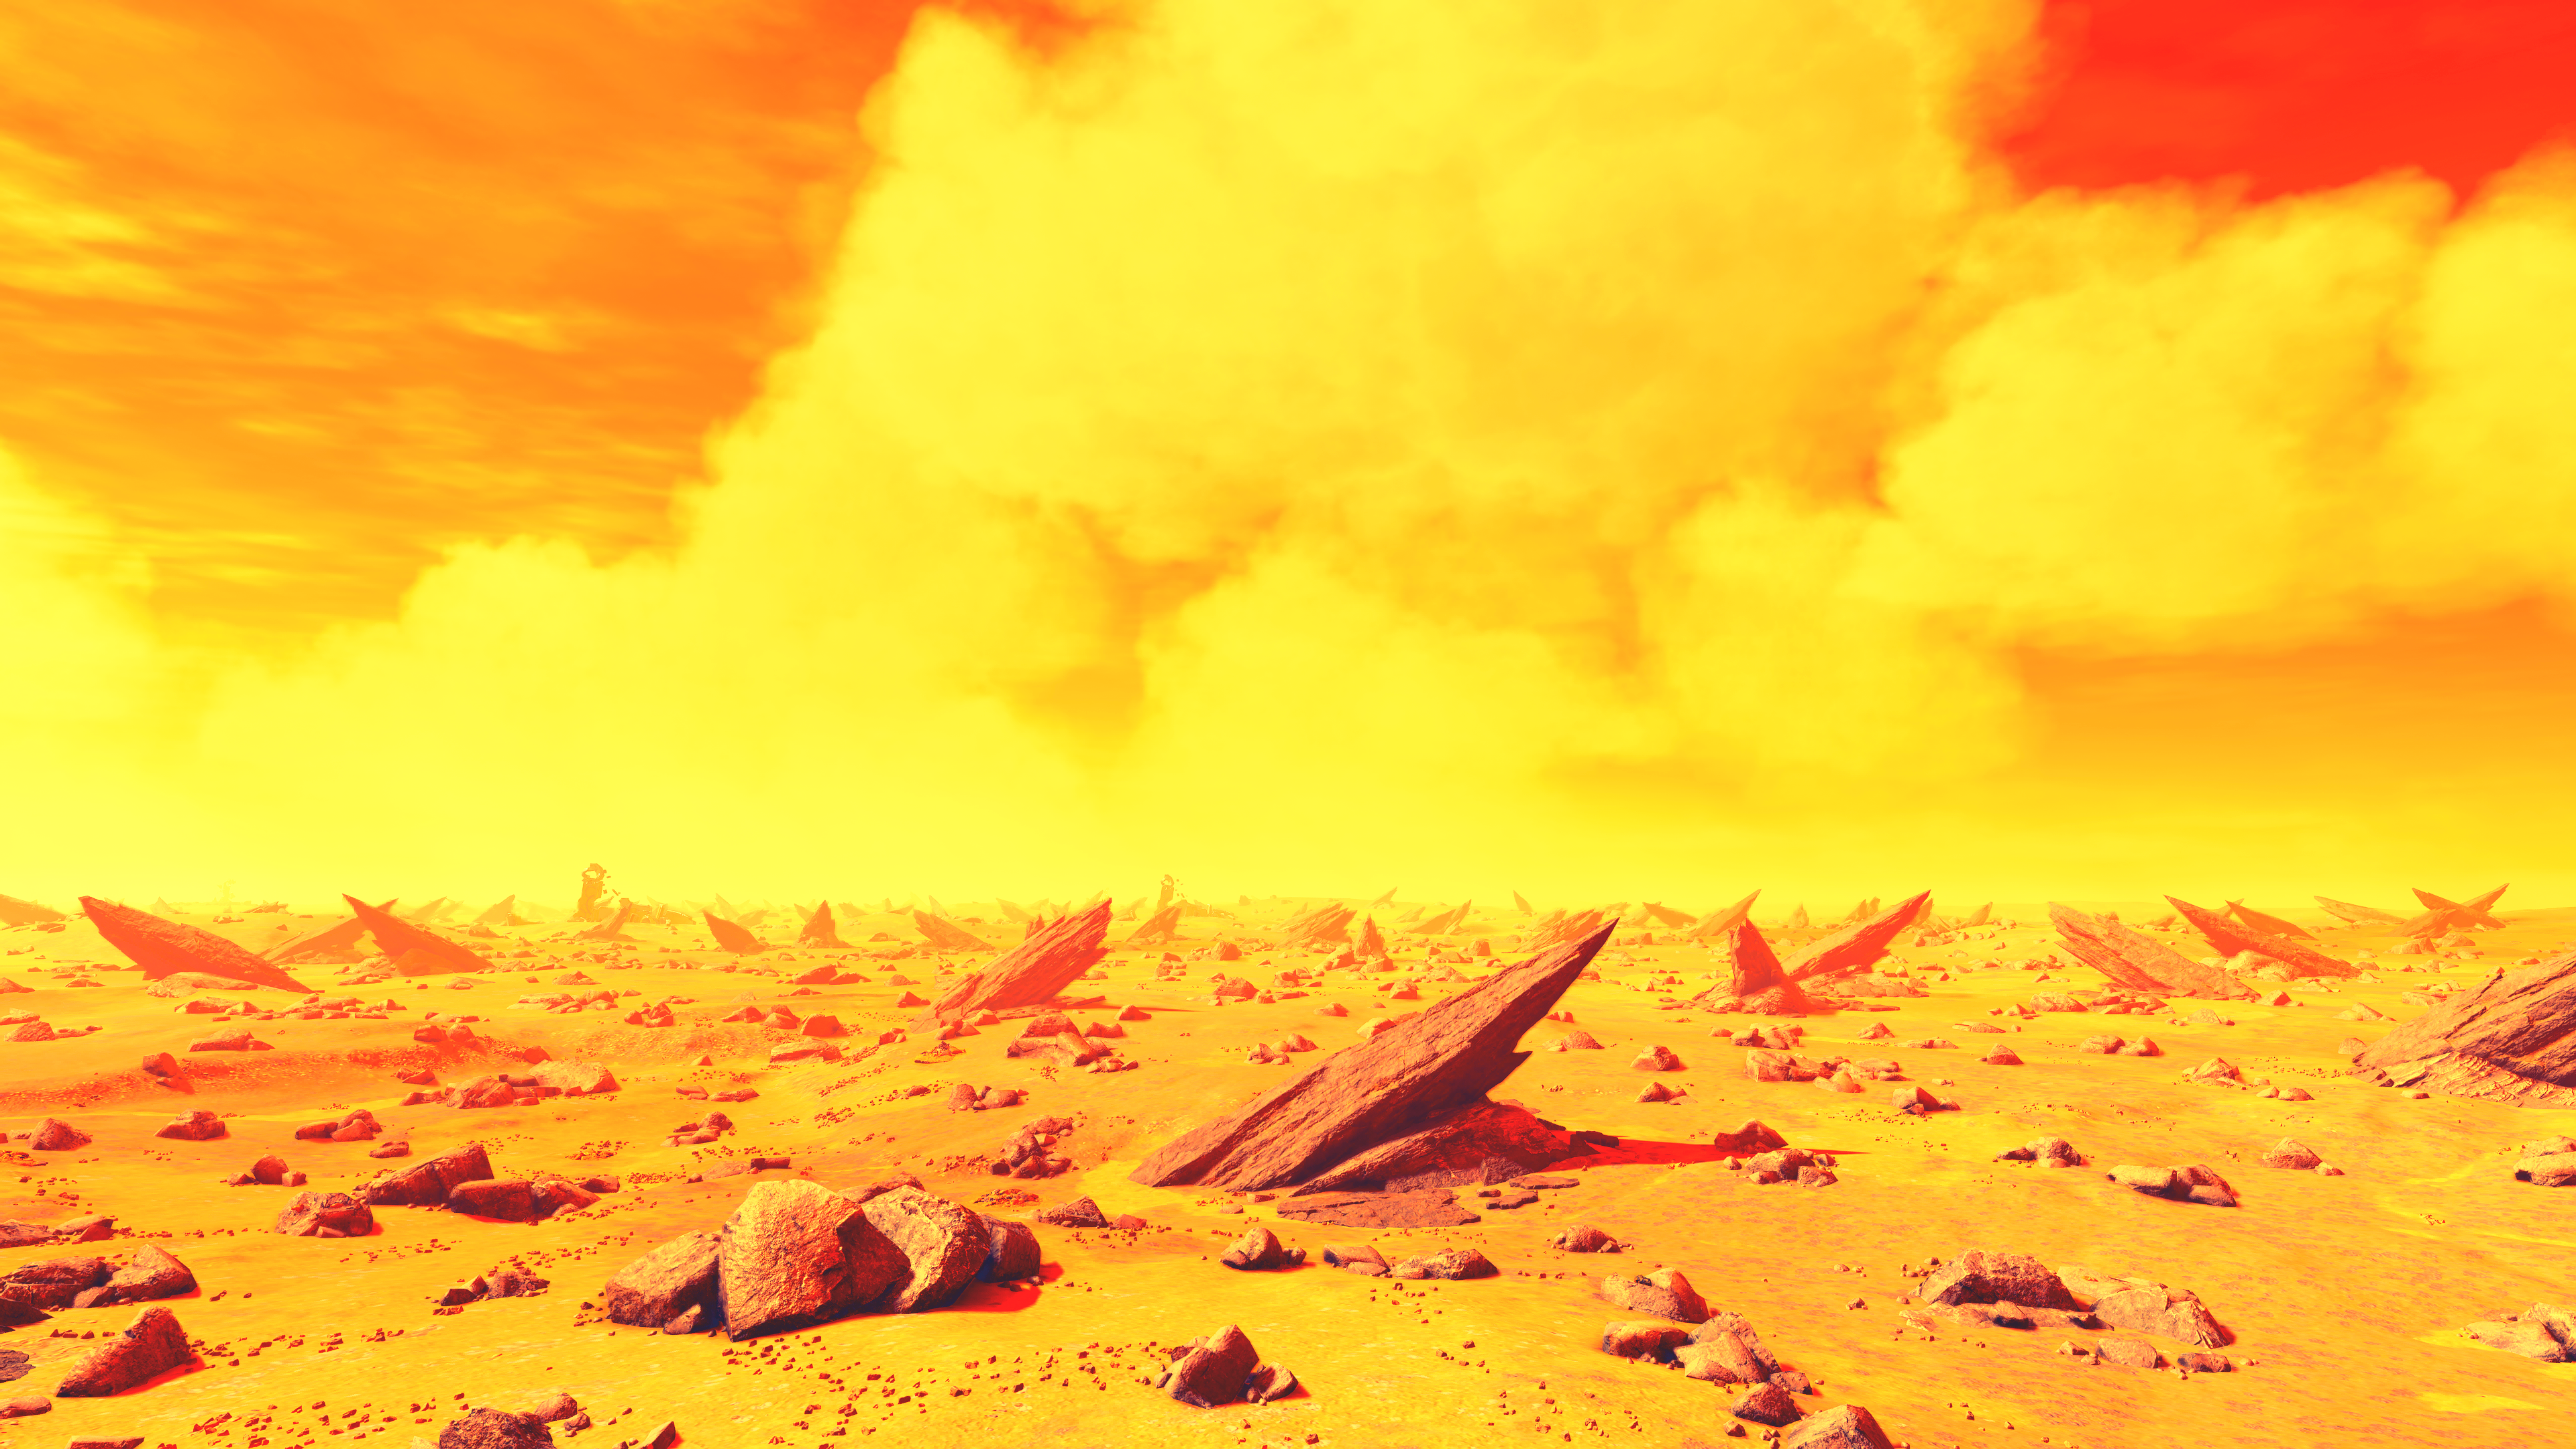 Starfield Video Game Landscape Orange Yellow Red Rocks Clouds Planet Video Games Xbox Xbox Series X 3840x2160